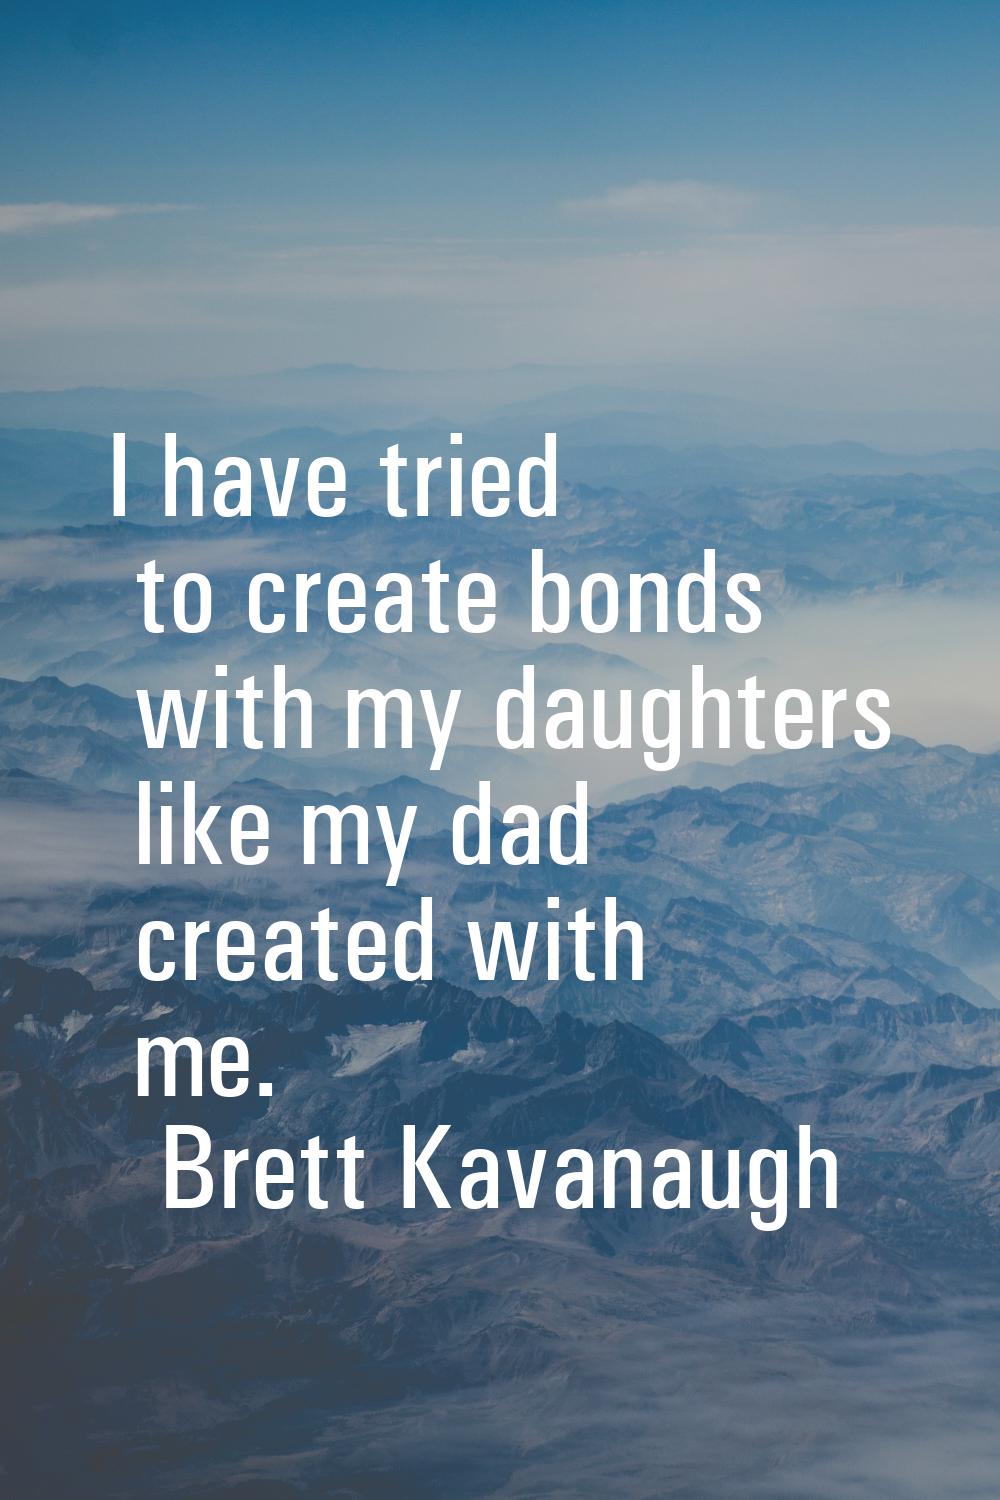 I have tried to create bonds with my daughters like my dad created with me.